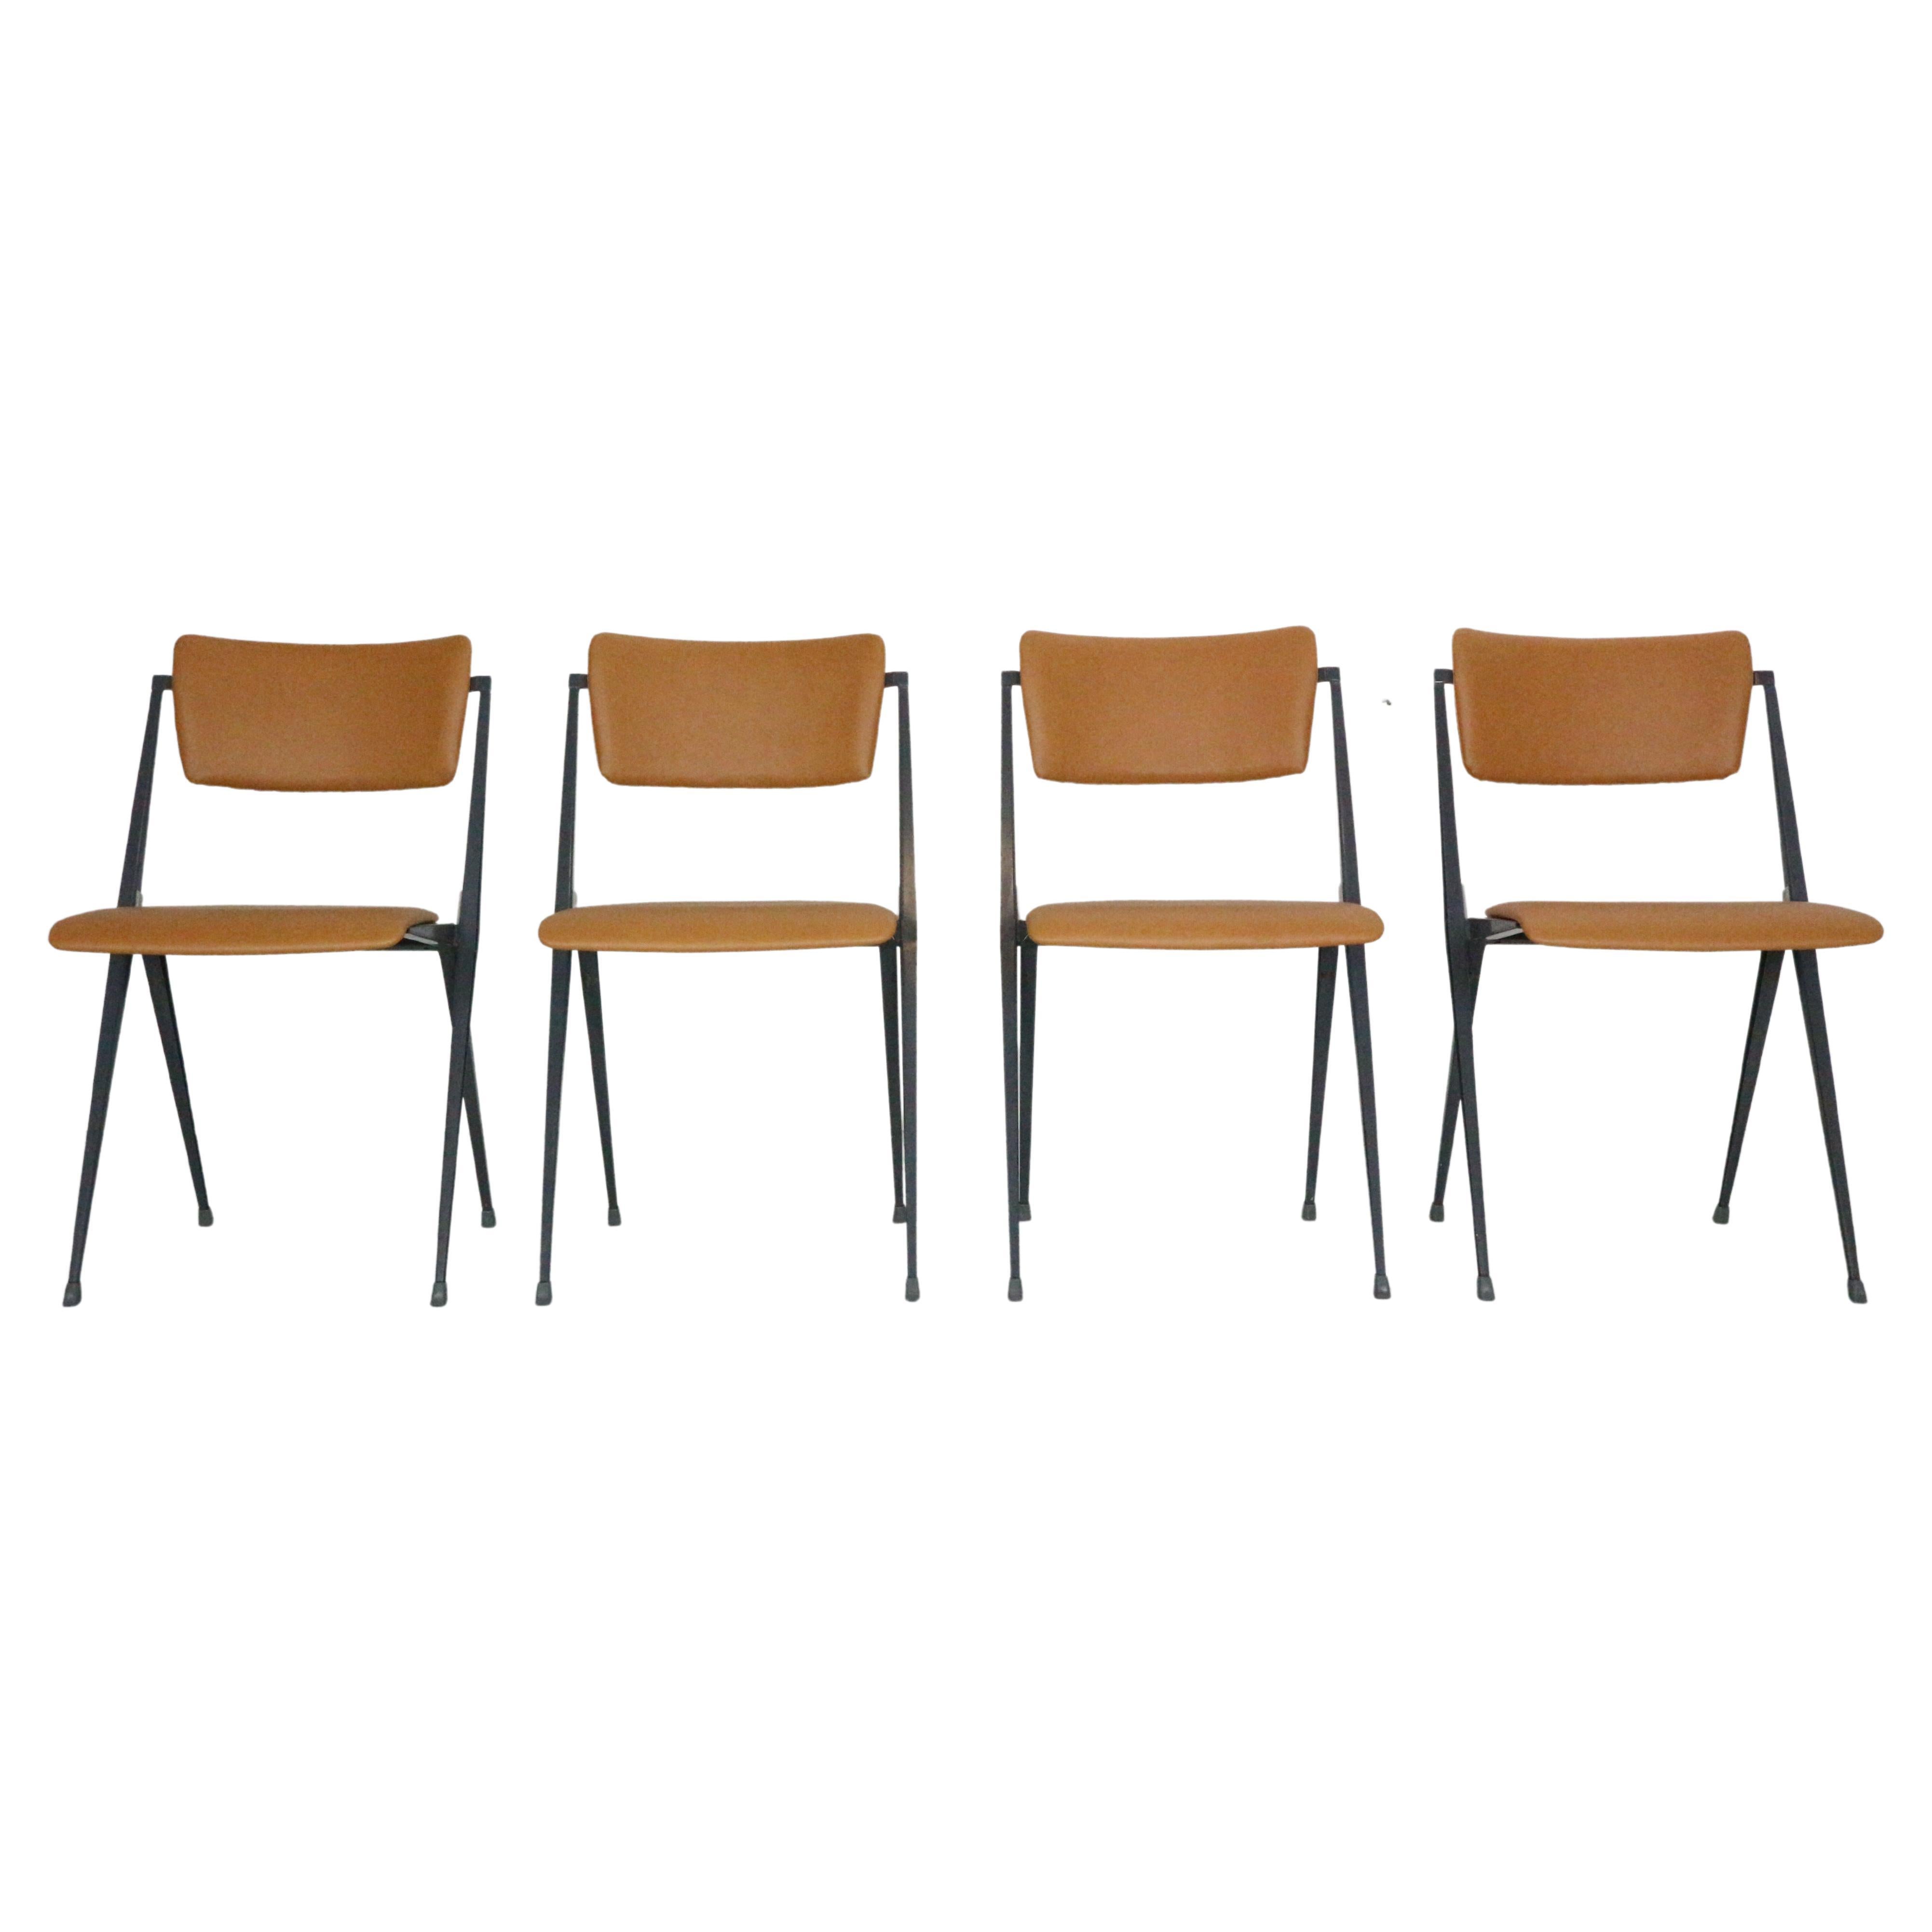 Wim Rietveld Set Of 4 Pyramide Chairs For De Cirkel, 1966 Netherlands For Sale